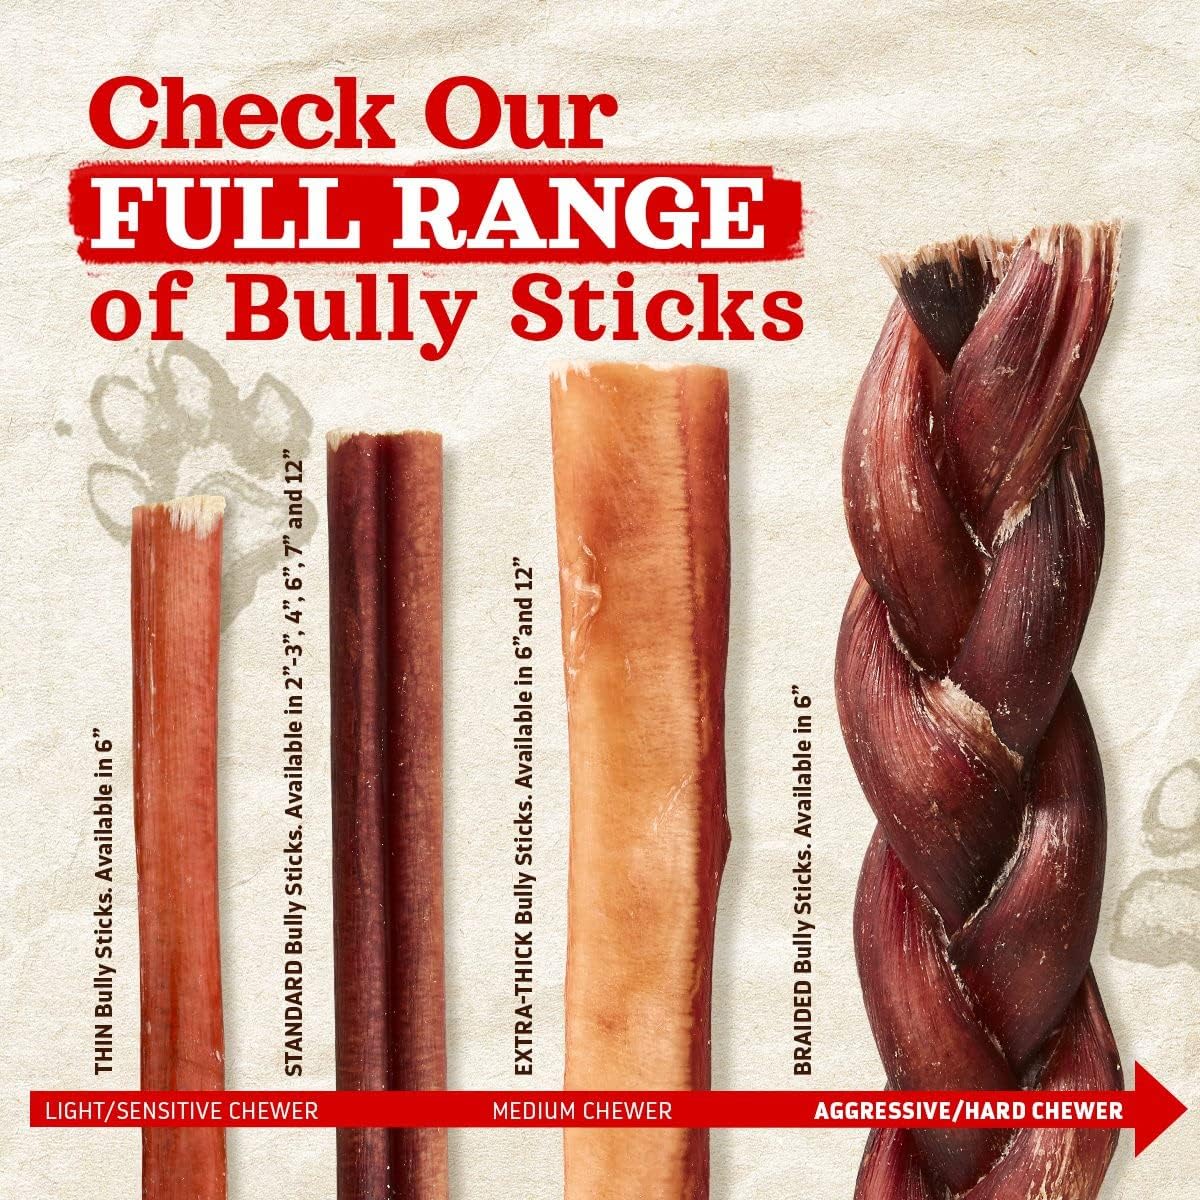 Natural Farm Odor-Free Braided Bully Sticks (6 Inch, 10 Pack) - 100% Grass-Fed Beef, Grain-Free, Low Fat & Fully Digestible Dental Treats - Safest Long Lasting Pizzle Chews to Keep Your Dog Busy : Pet Supplies